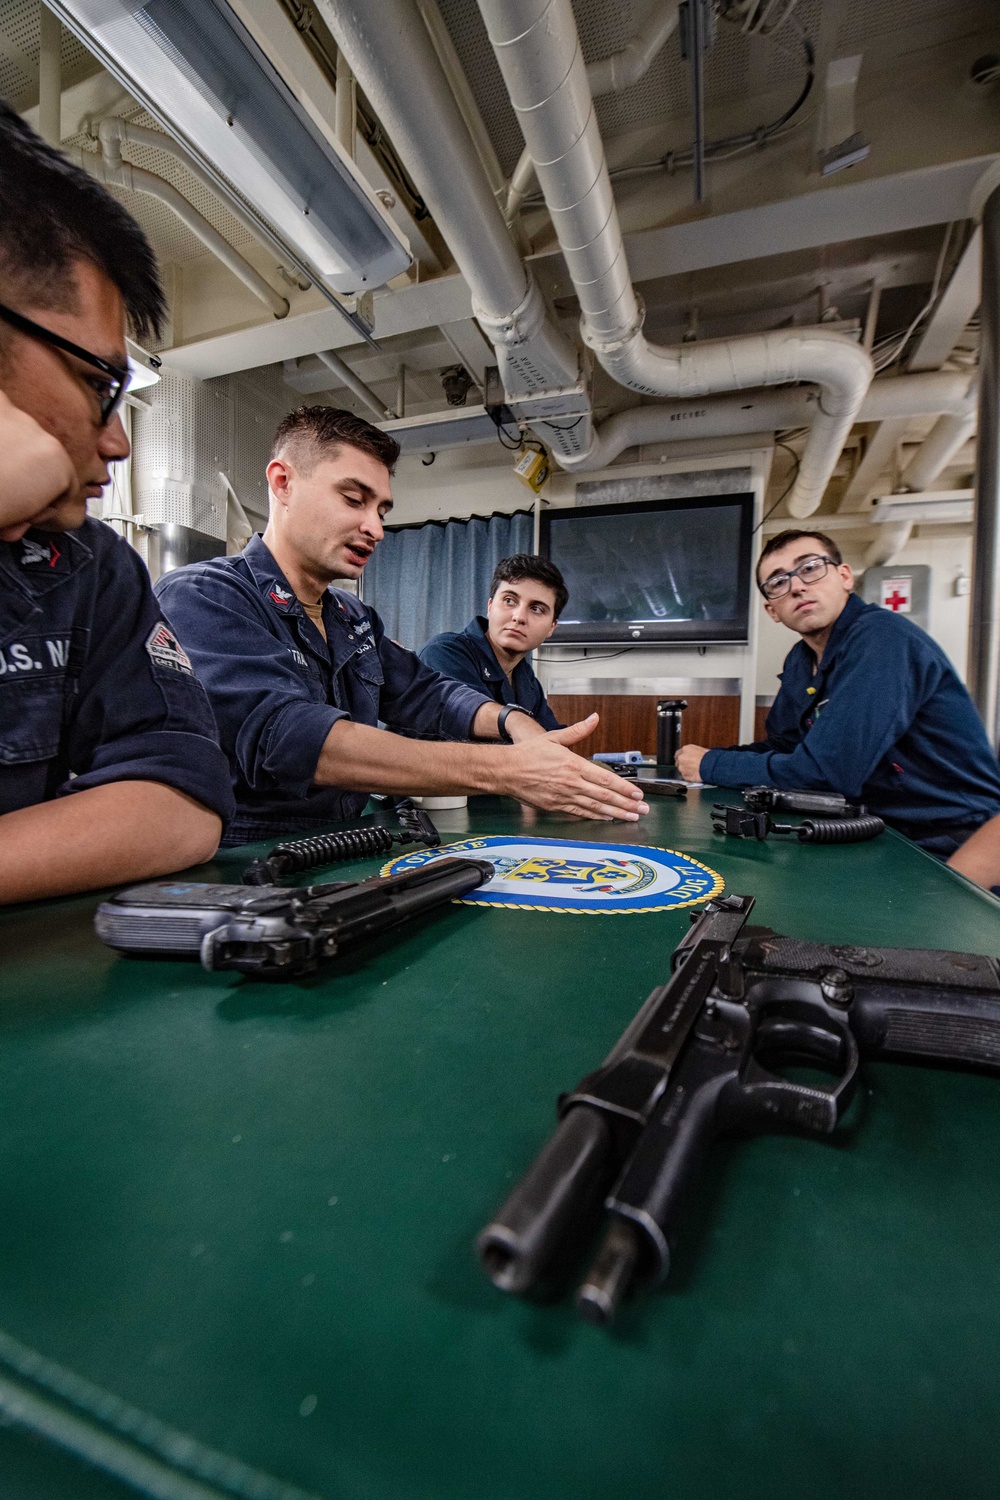 USS O'Kane (DDG 77) Conducts Weapons Training